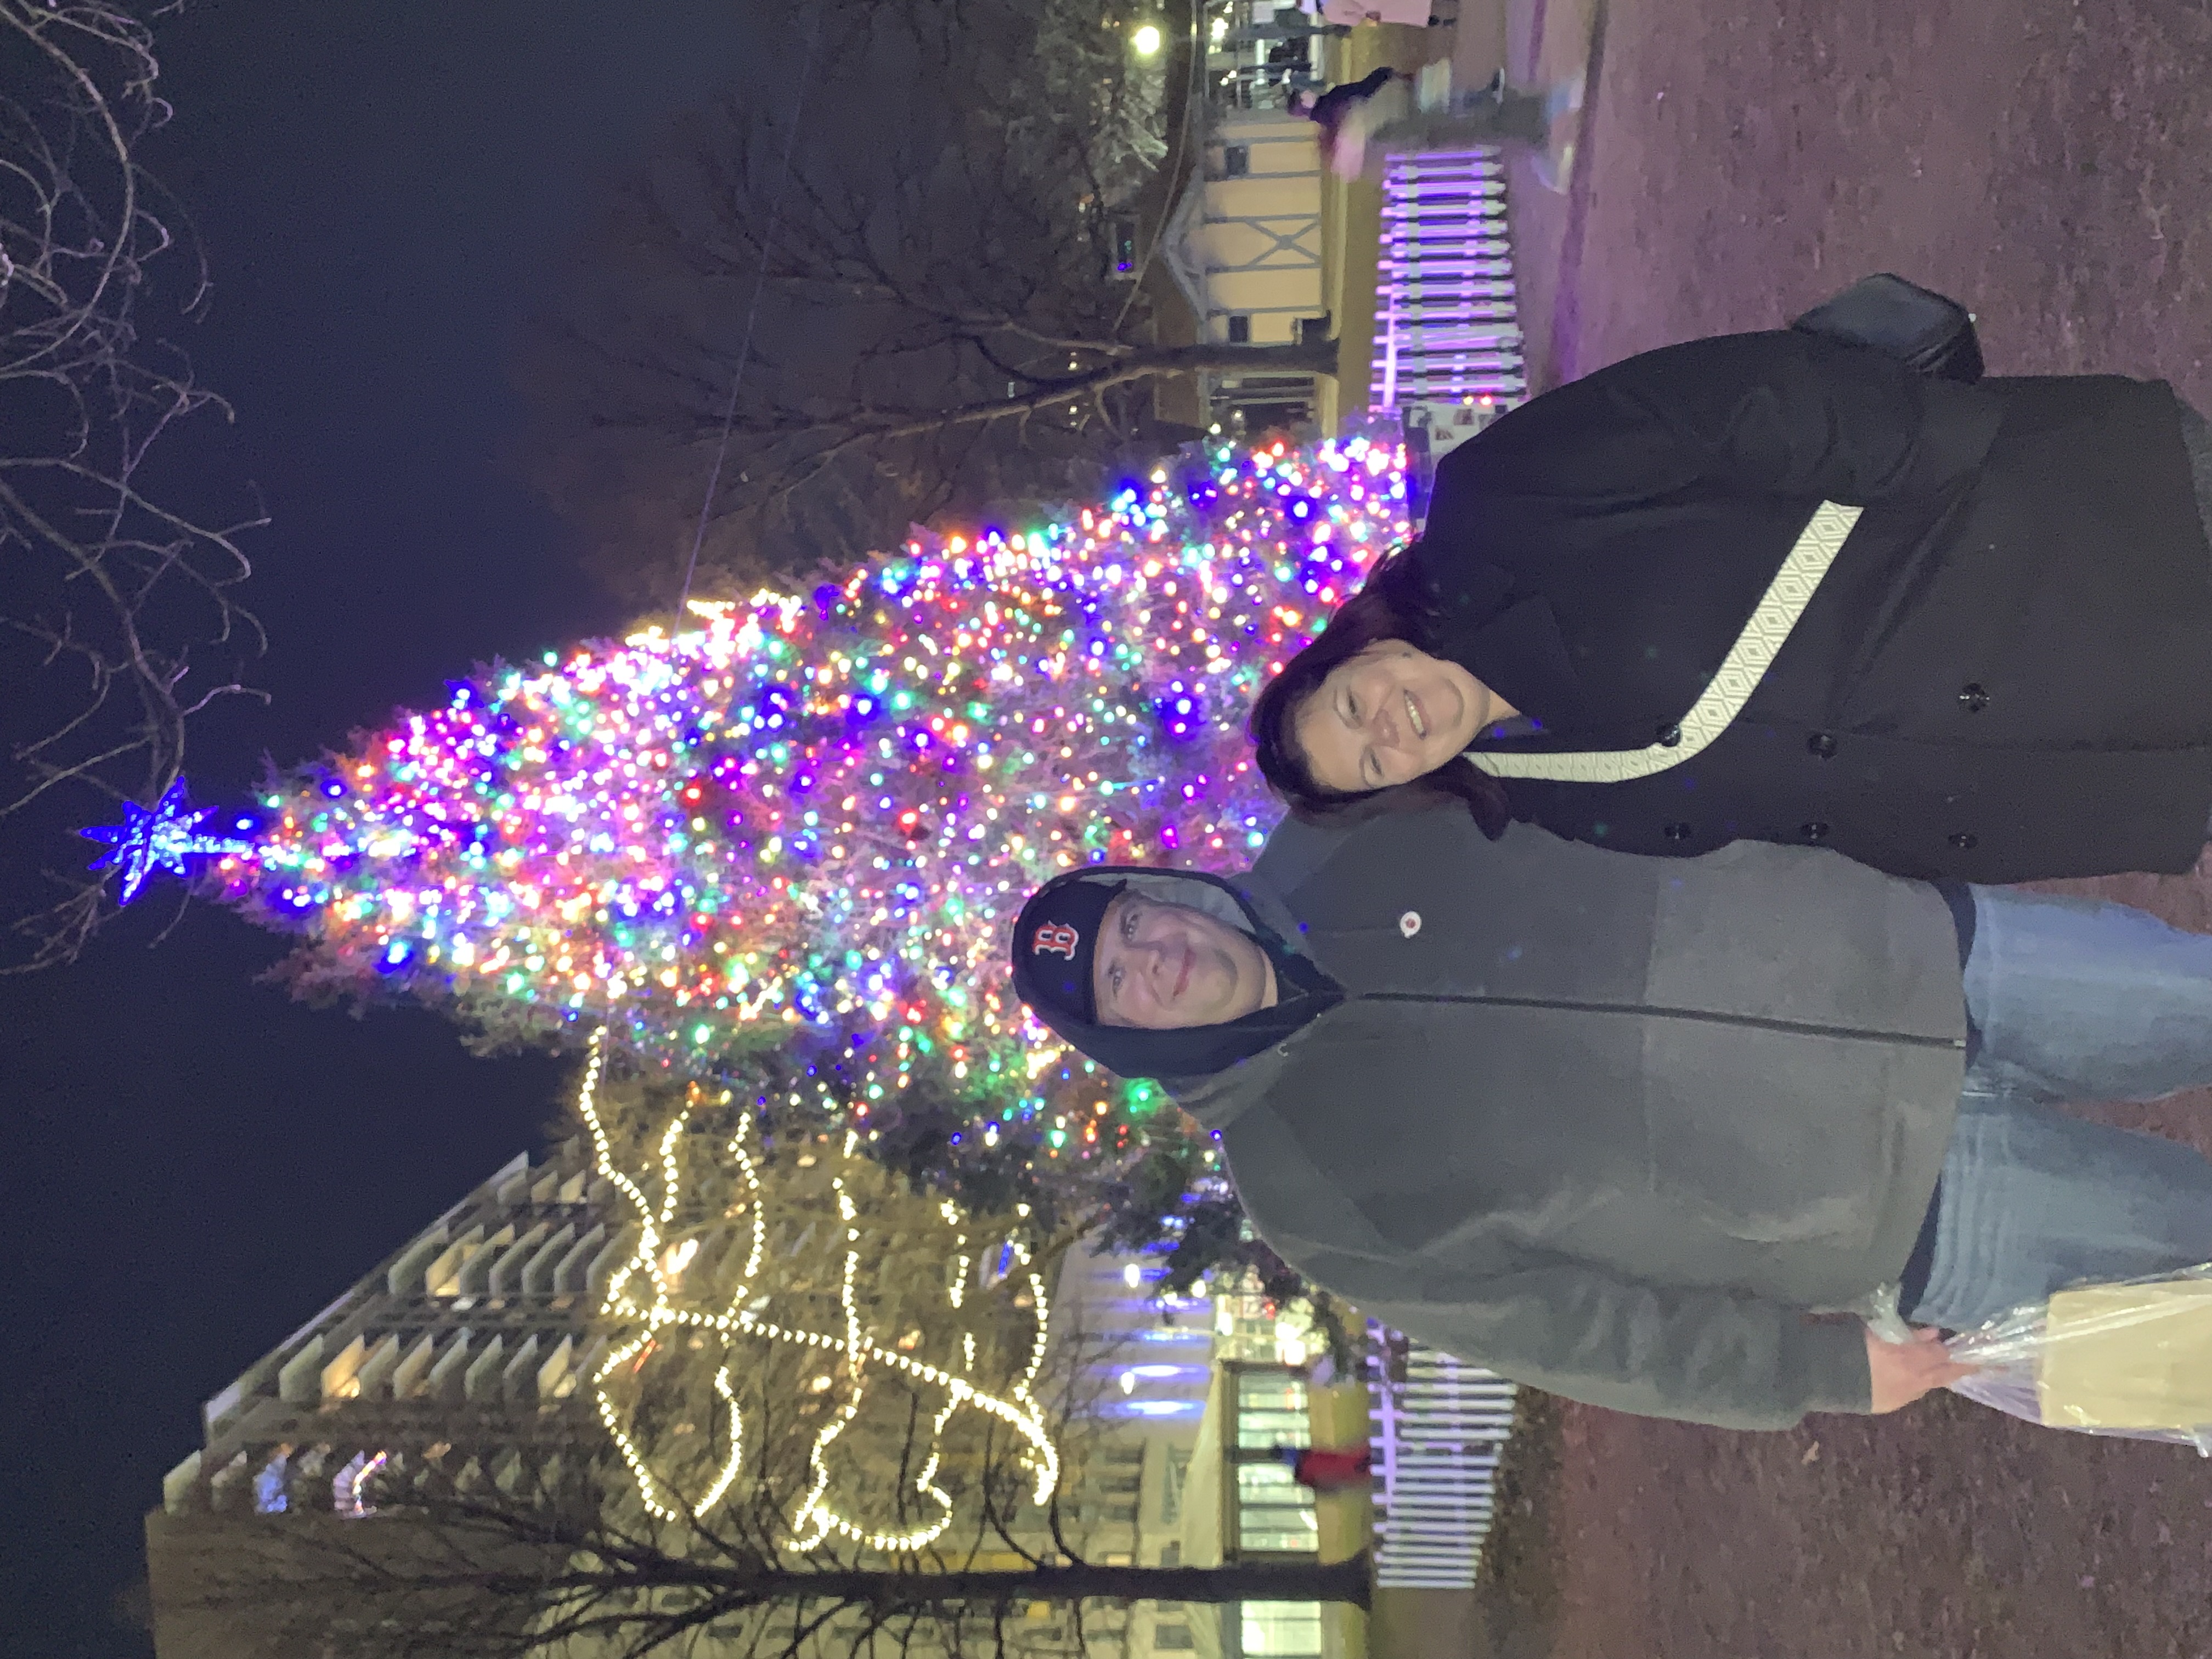 mike and michelle in front of park christmas tree